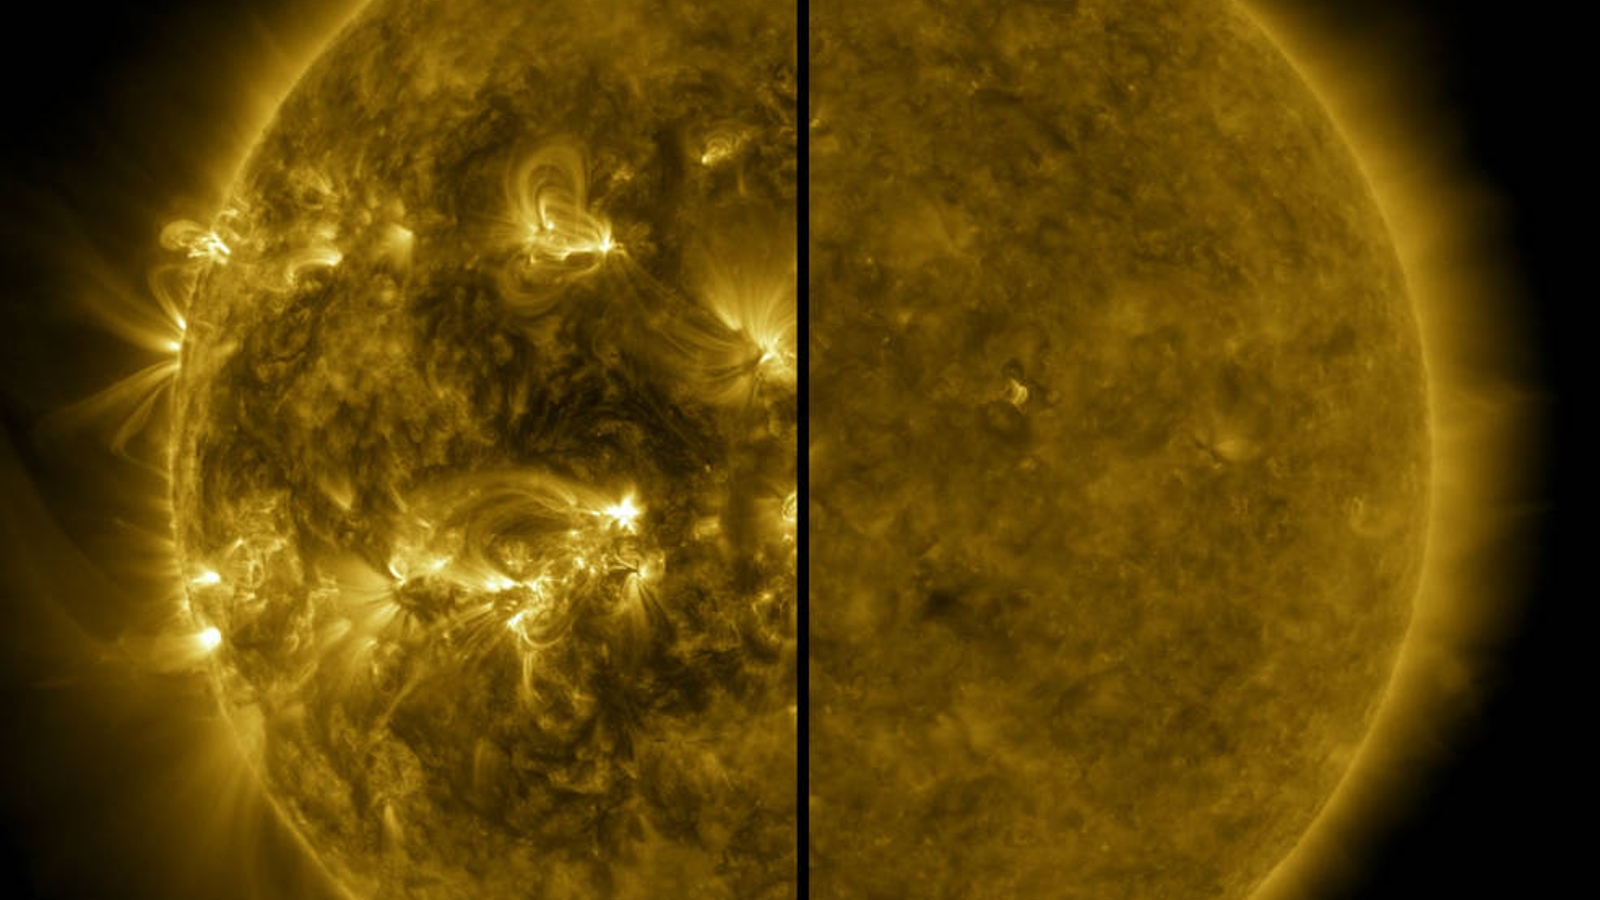 An image of the sun split in half. The left side shows the sun during solar maximum, where its is more fiery and chaotic, and the right side shows the star during solar minimum, when it is more calm and smooth